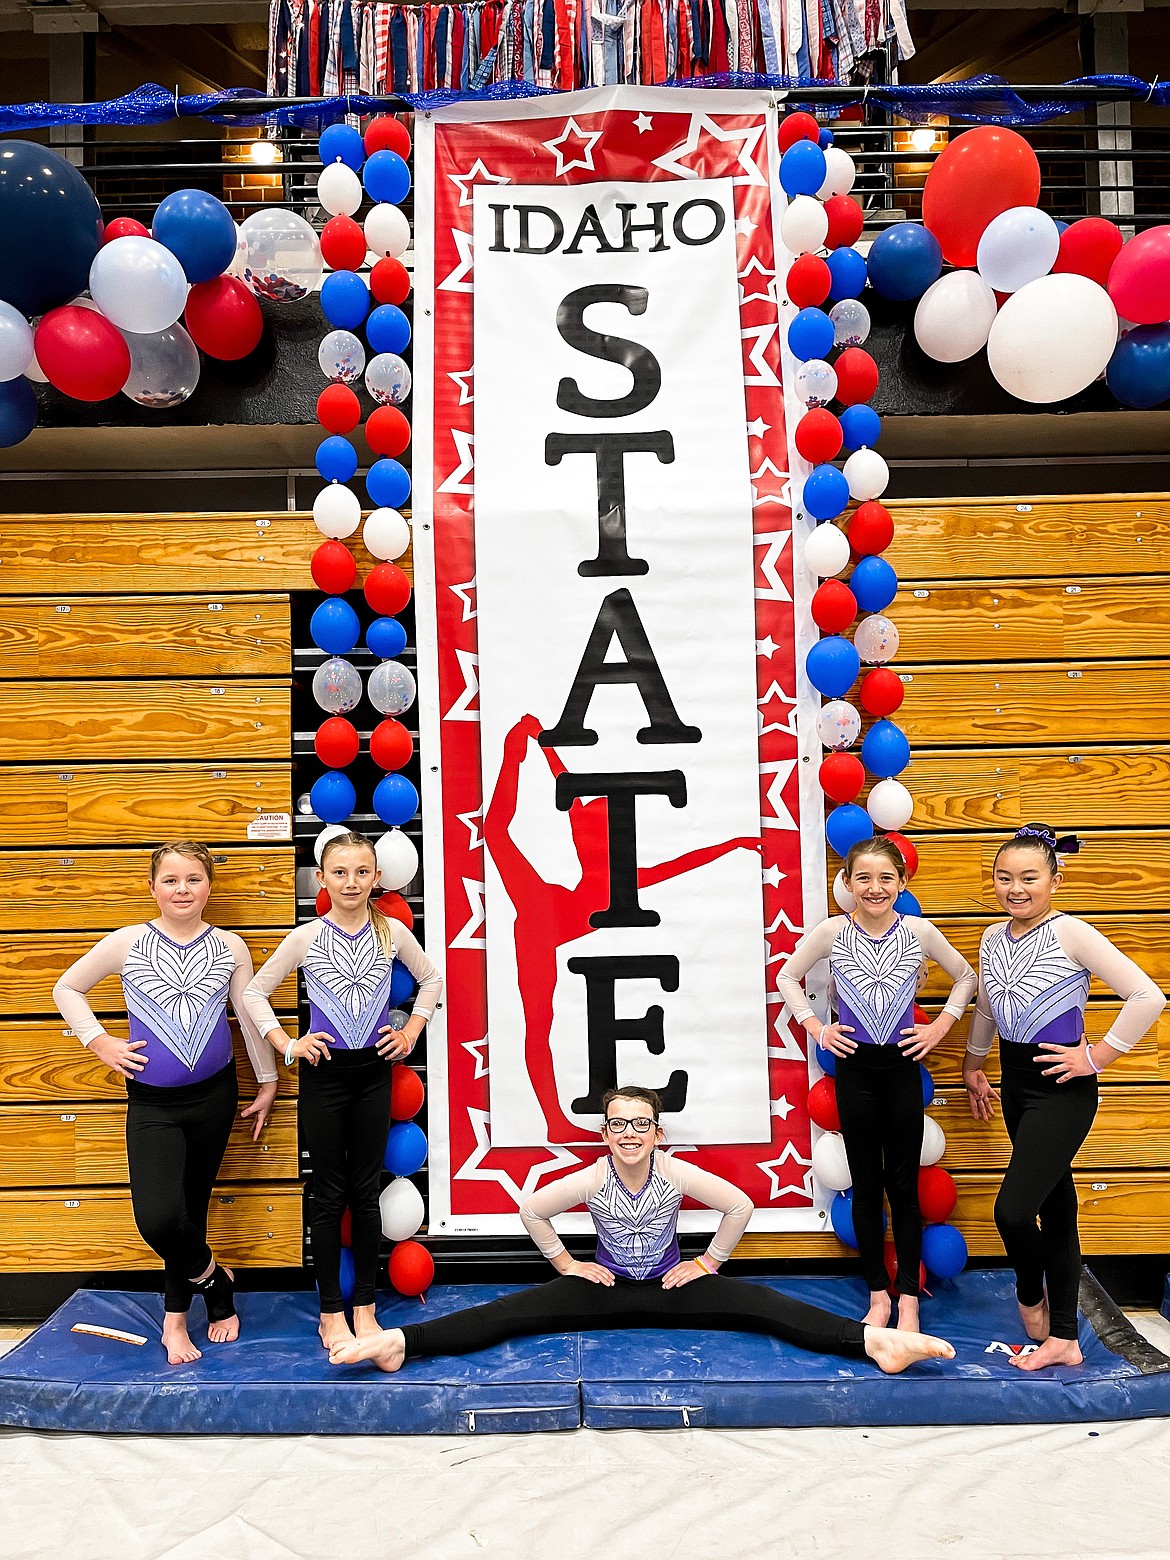 Courtesy photo
Avant Coeur Xcel Silvers at the Idaho state gymnastics championships in Moscow. From left are Ellie Anderson, Olivia Merry, Brinleigh Browne, Lois Chesley and Evelynn Prescott.